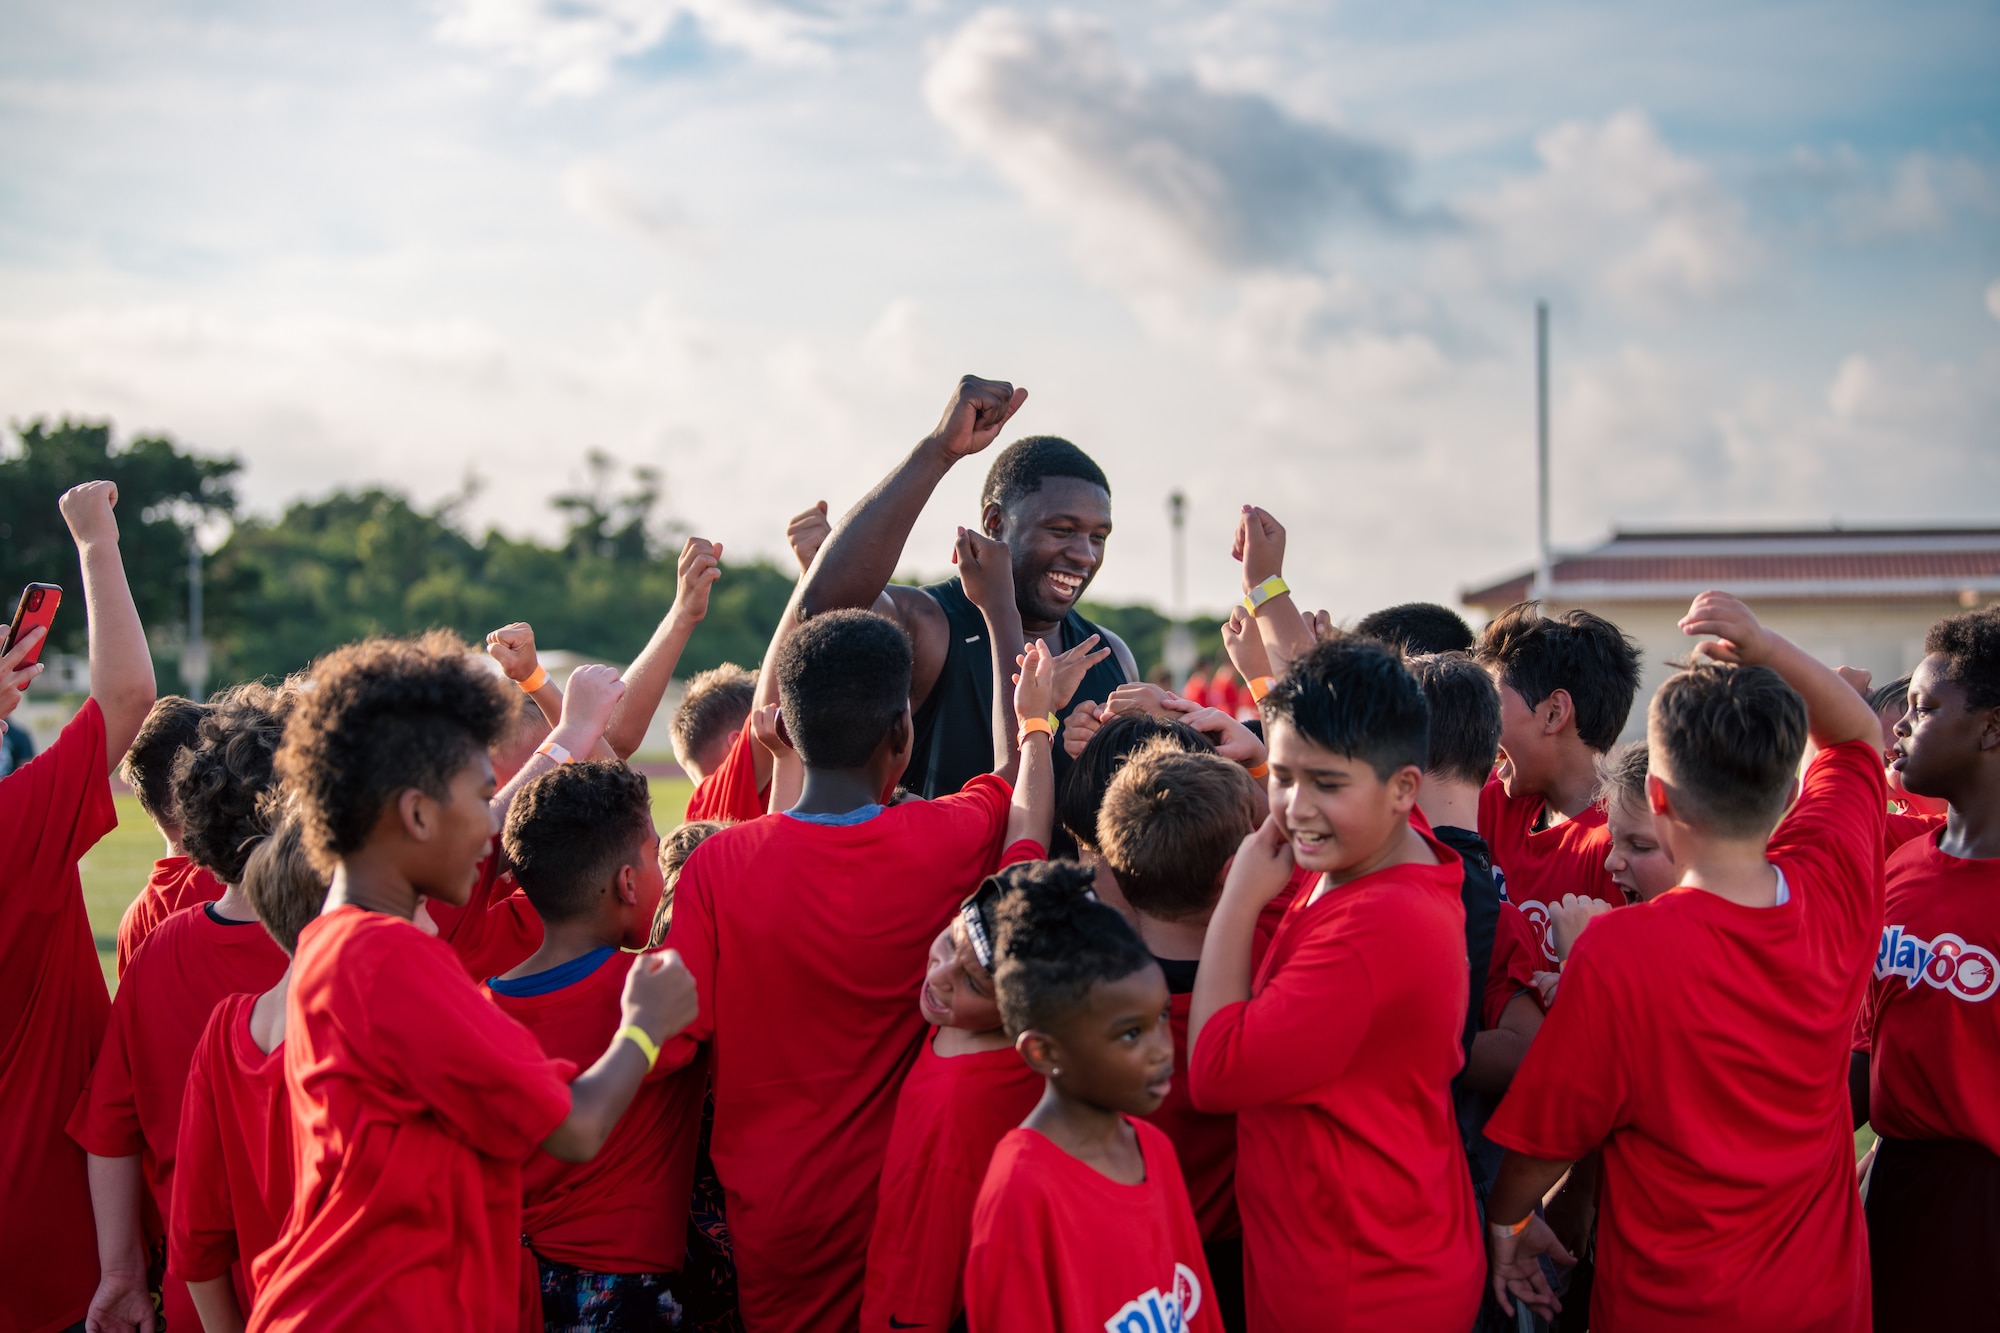 A group of kids in red shirts surround a football player.